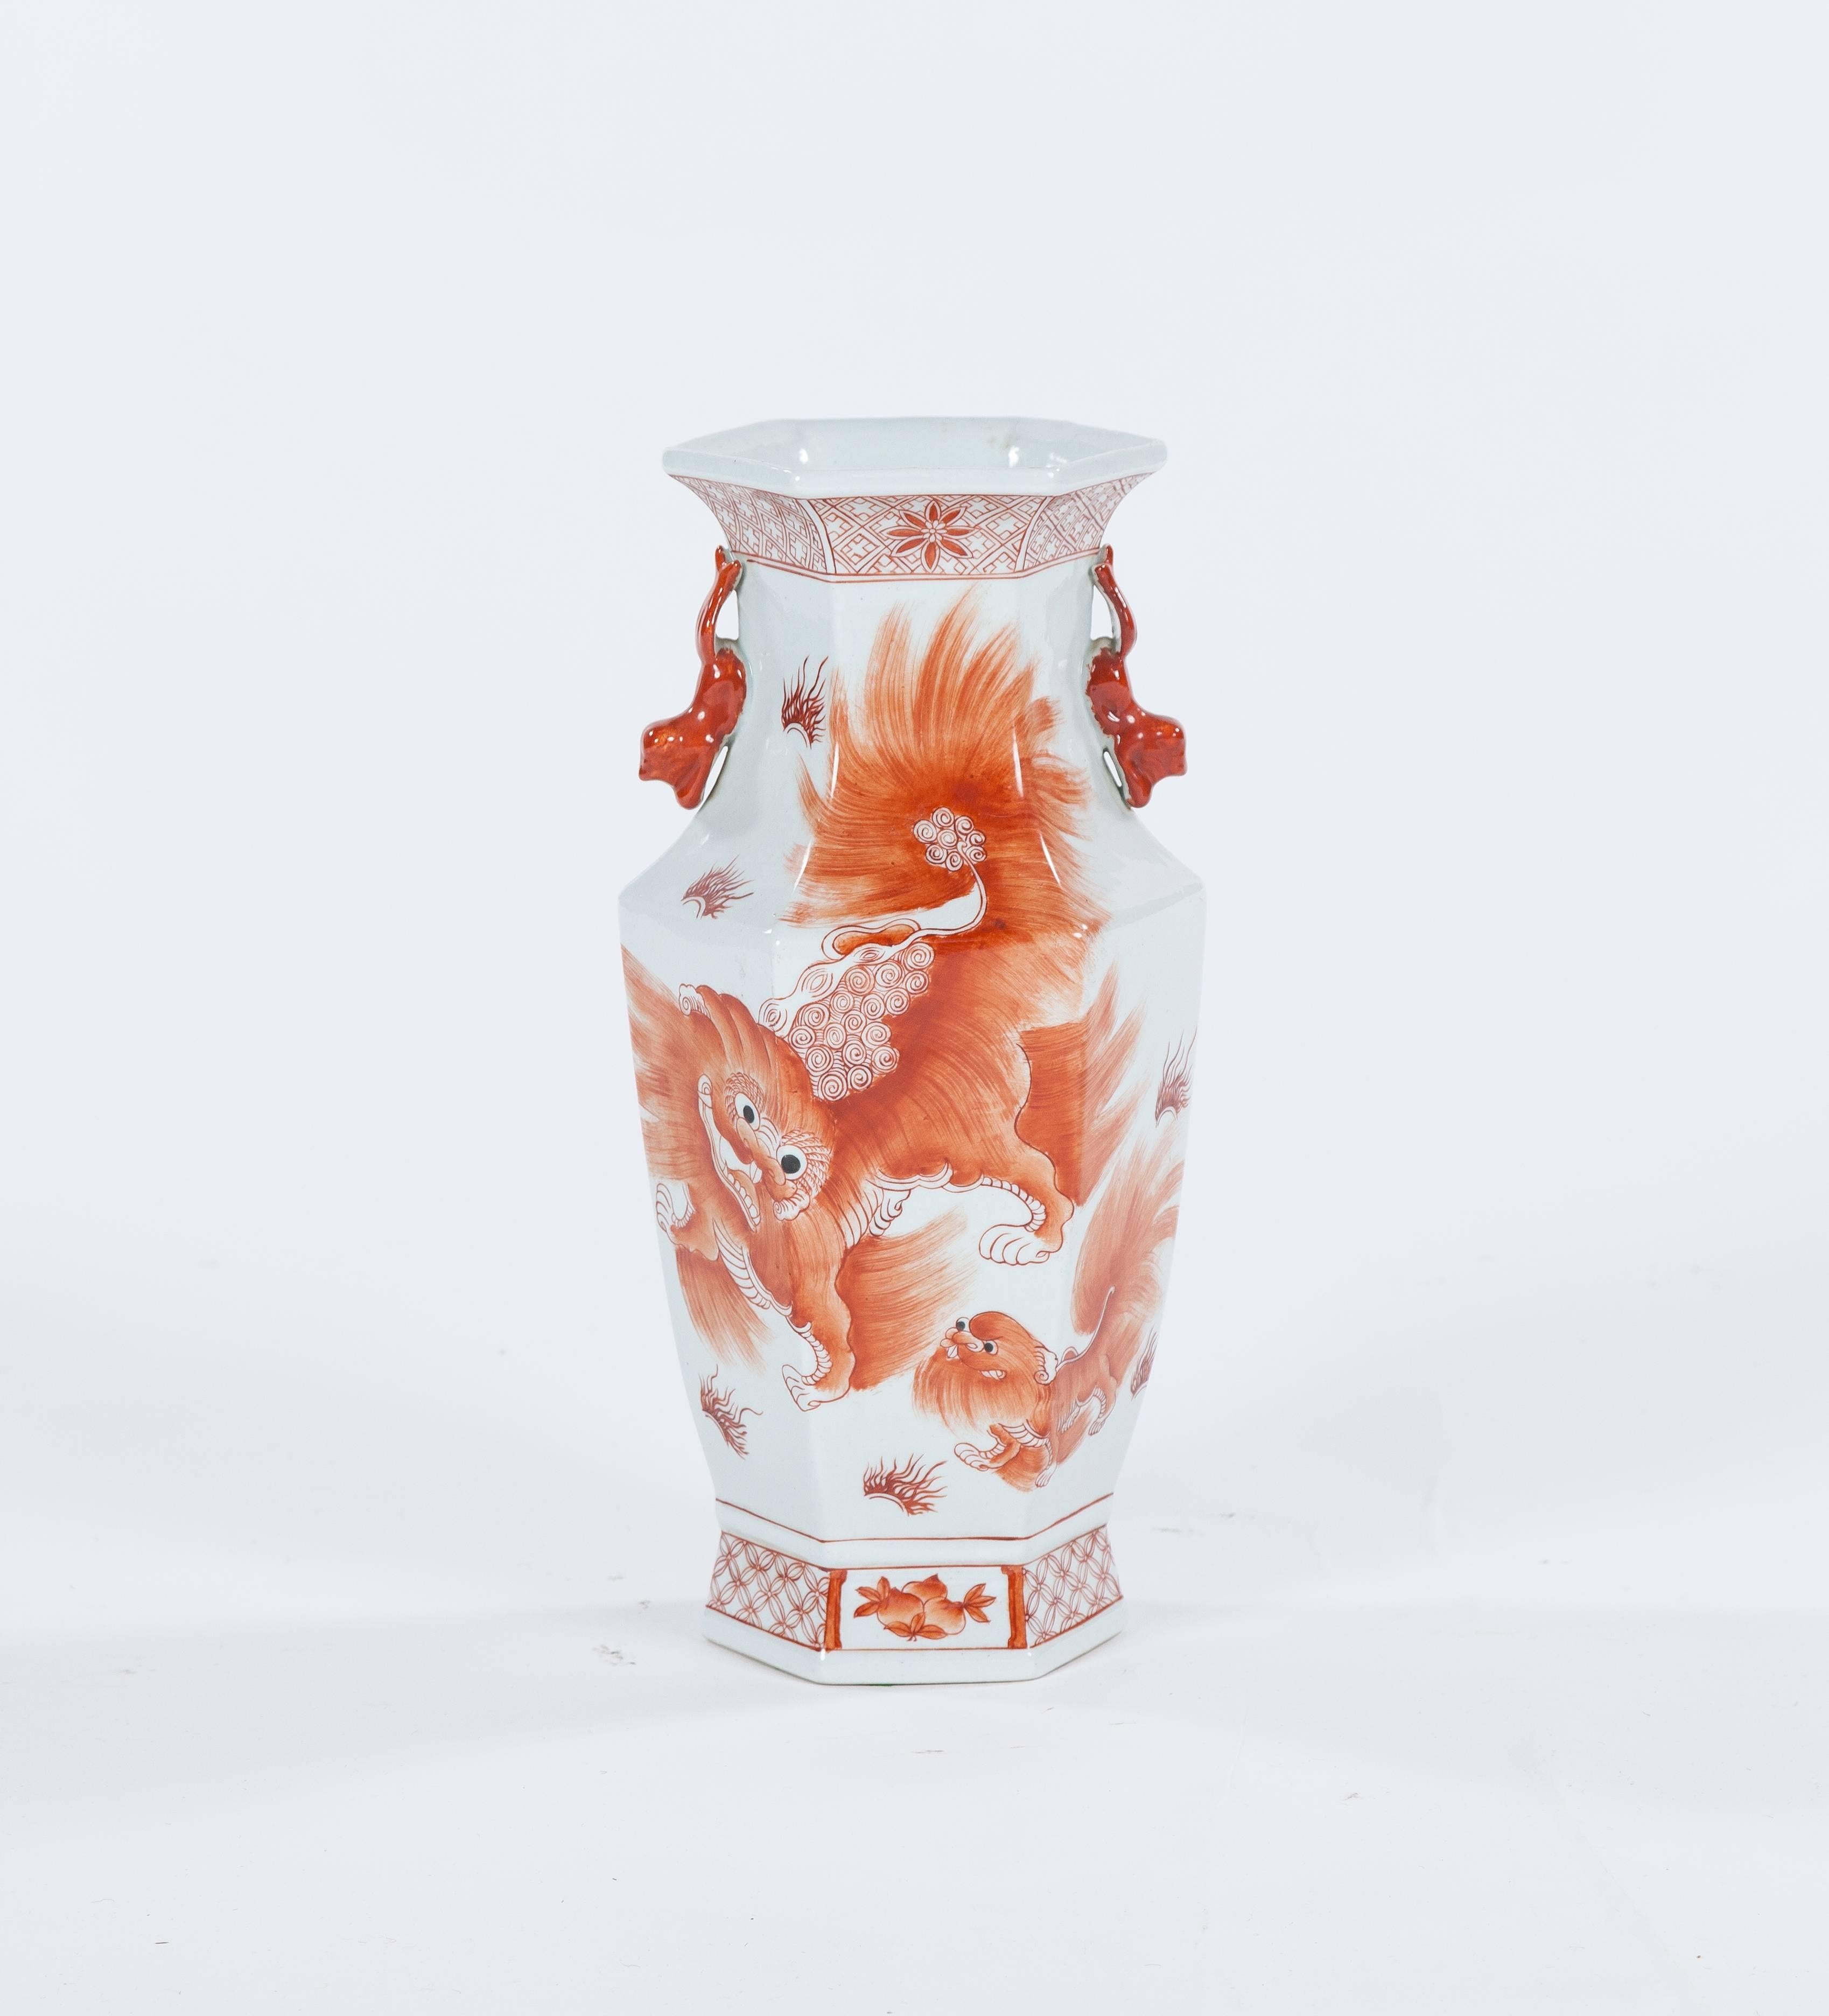 Chinese Export Pair of Vintage Orange and White Chinese Porcelain Vases, Early 20th Century For Sale